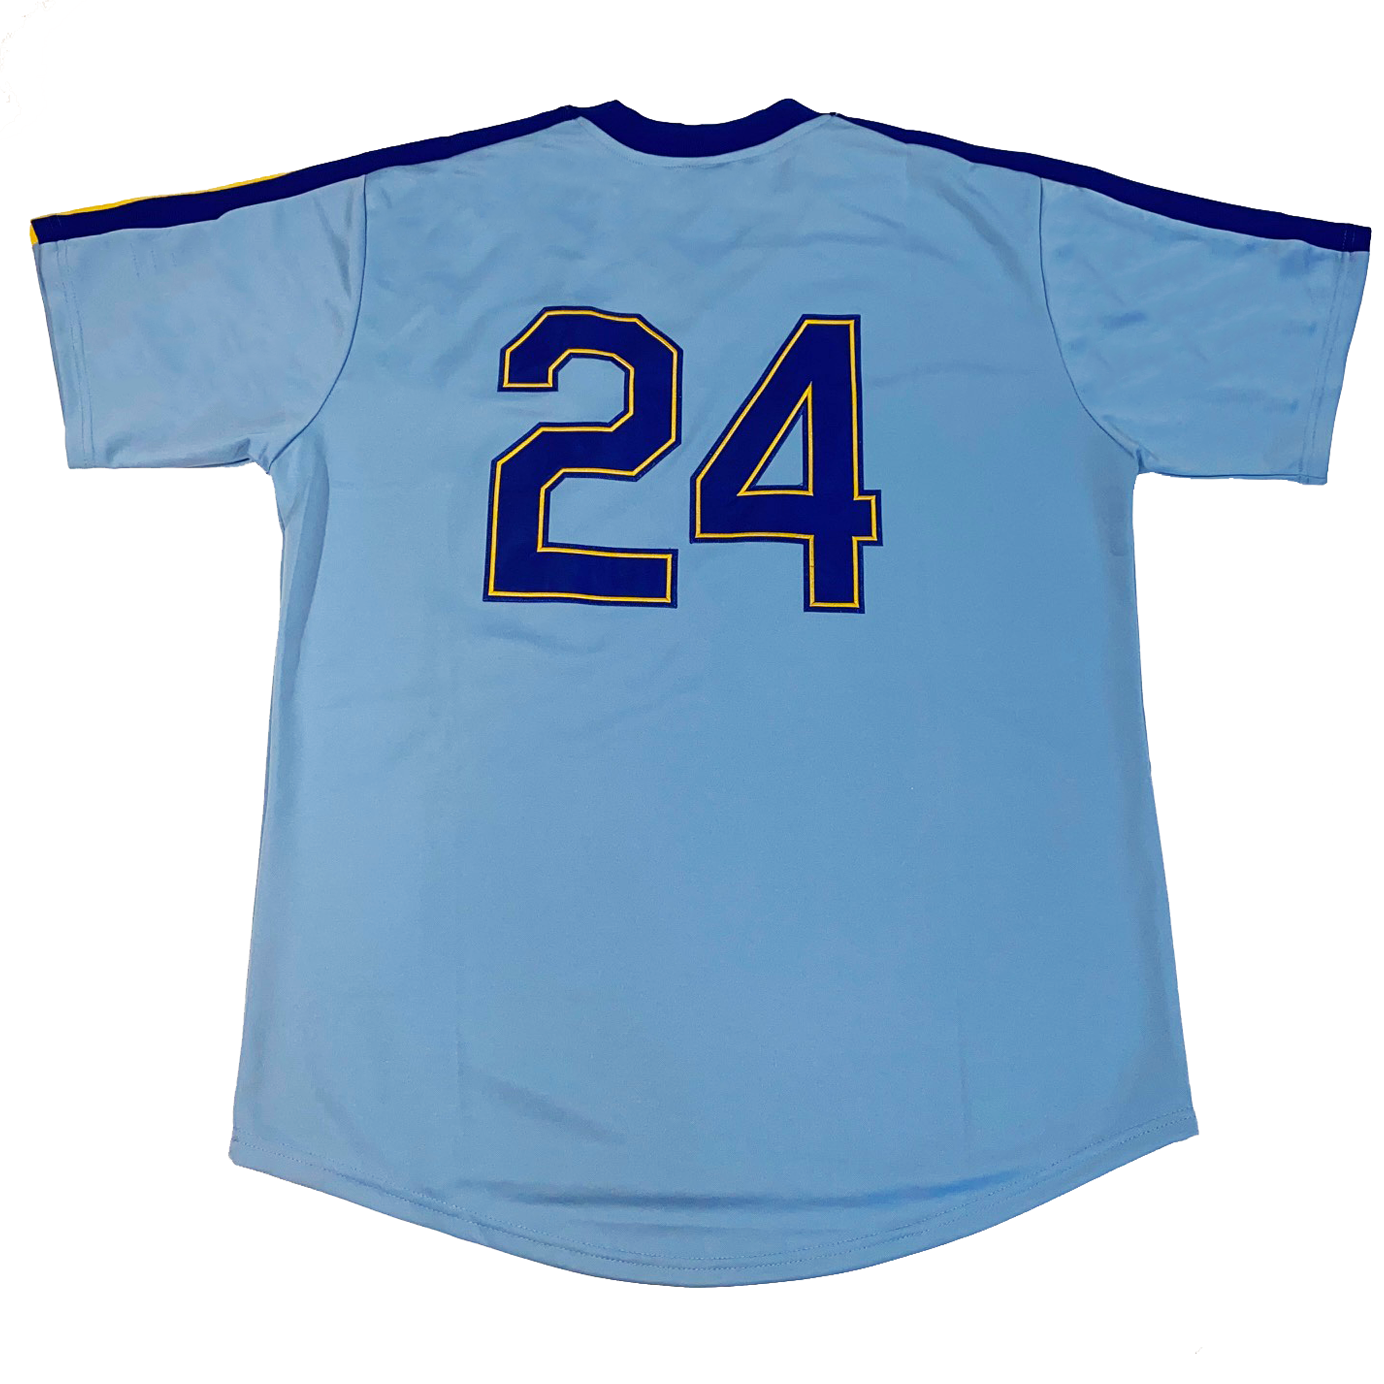 mariners jersey blue